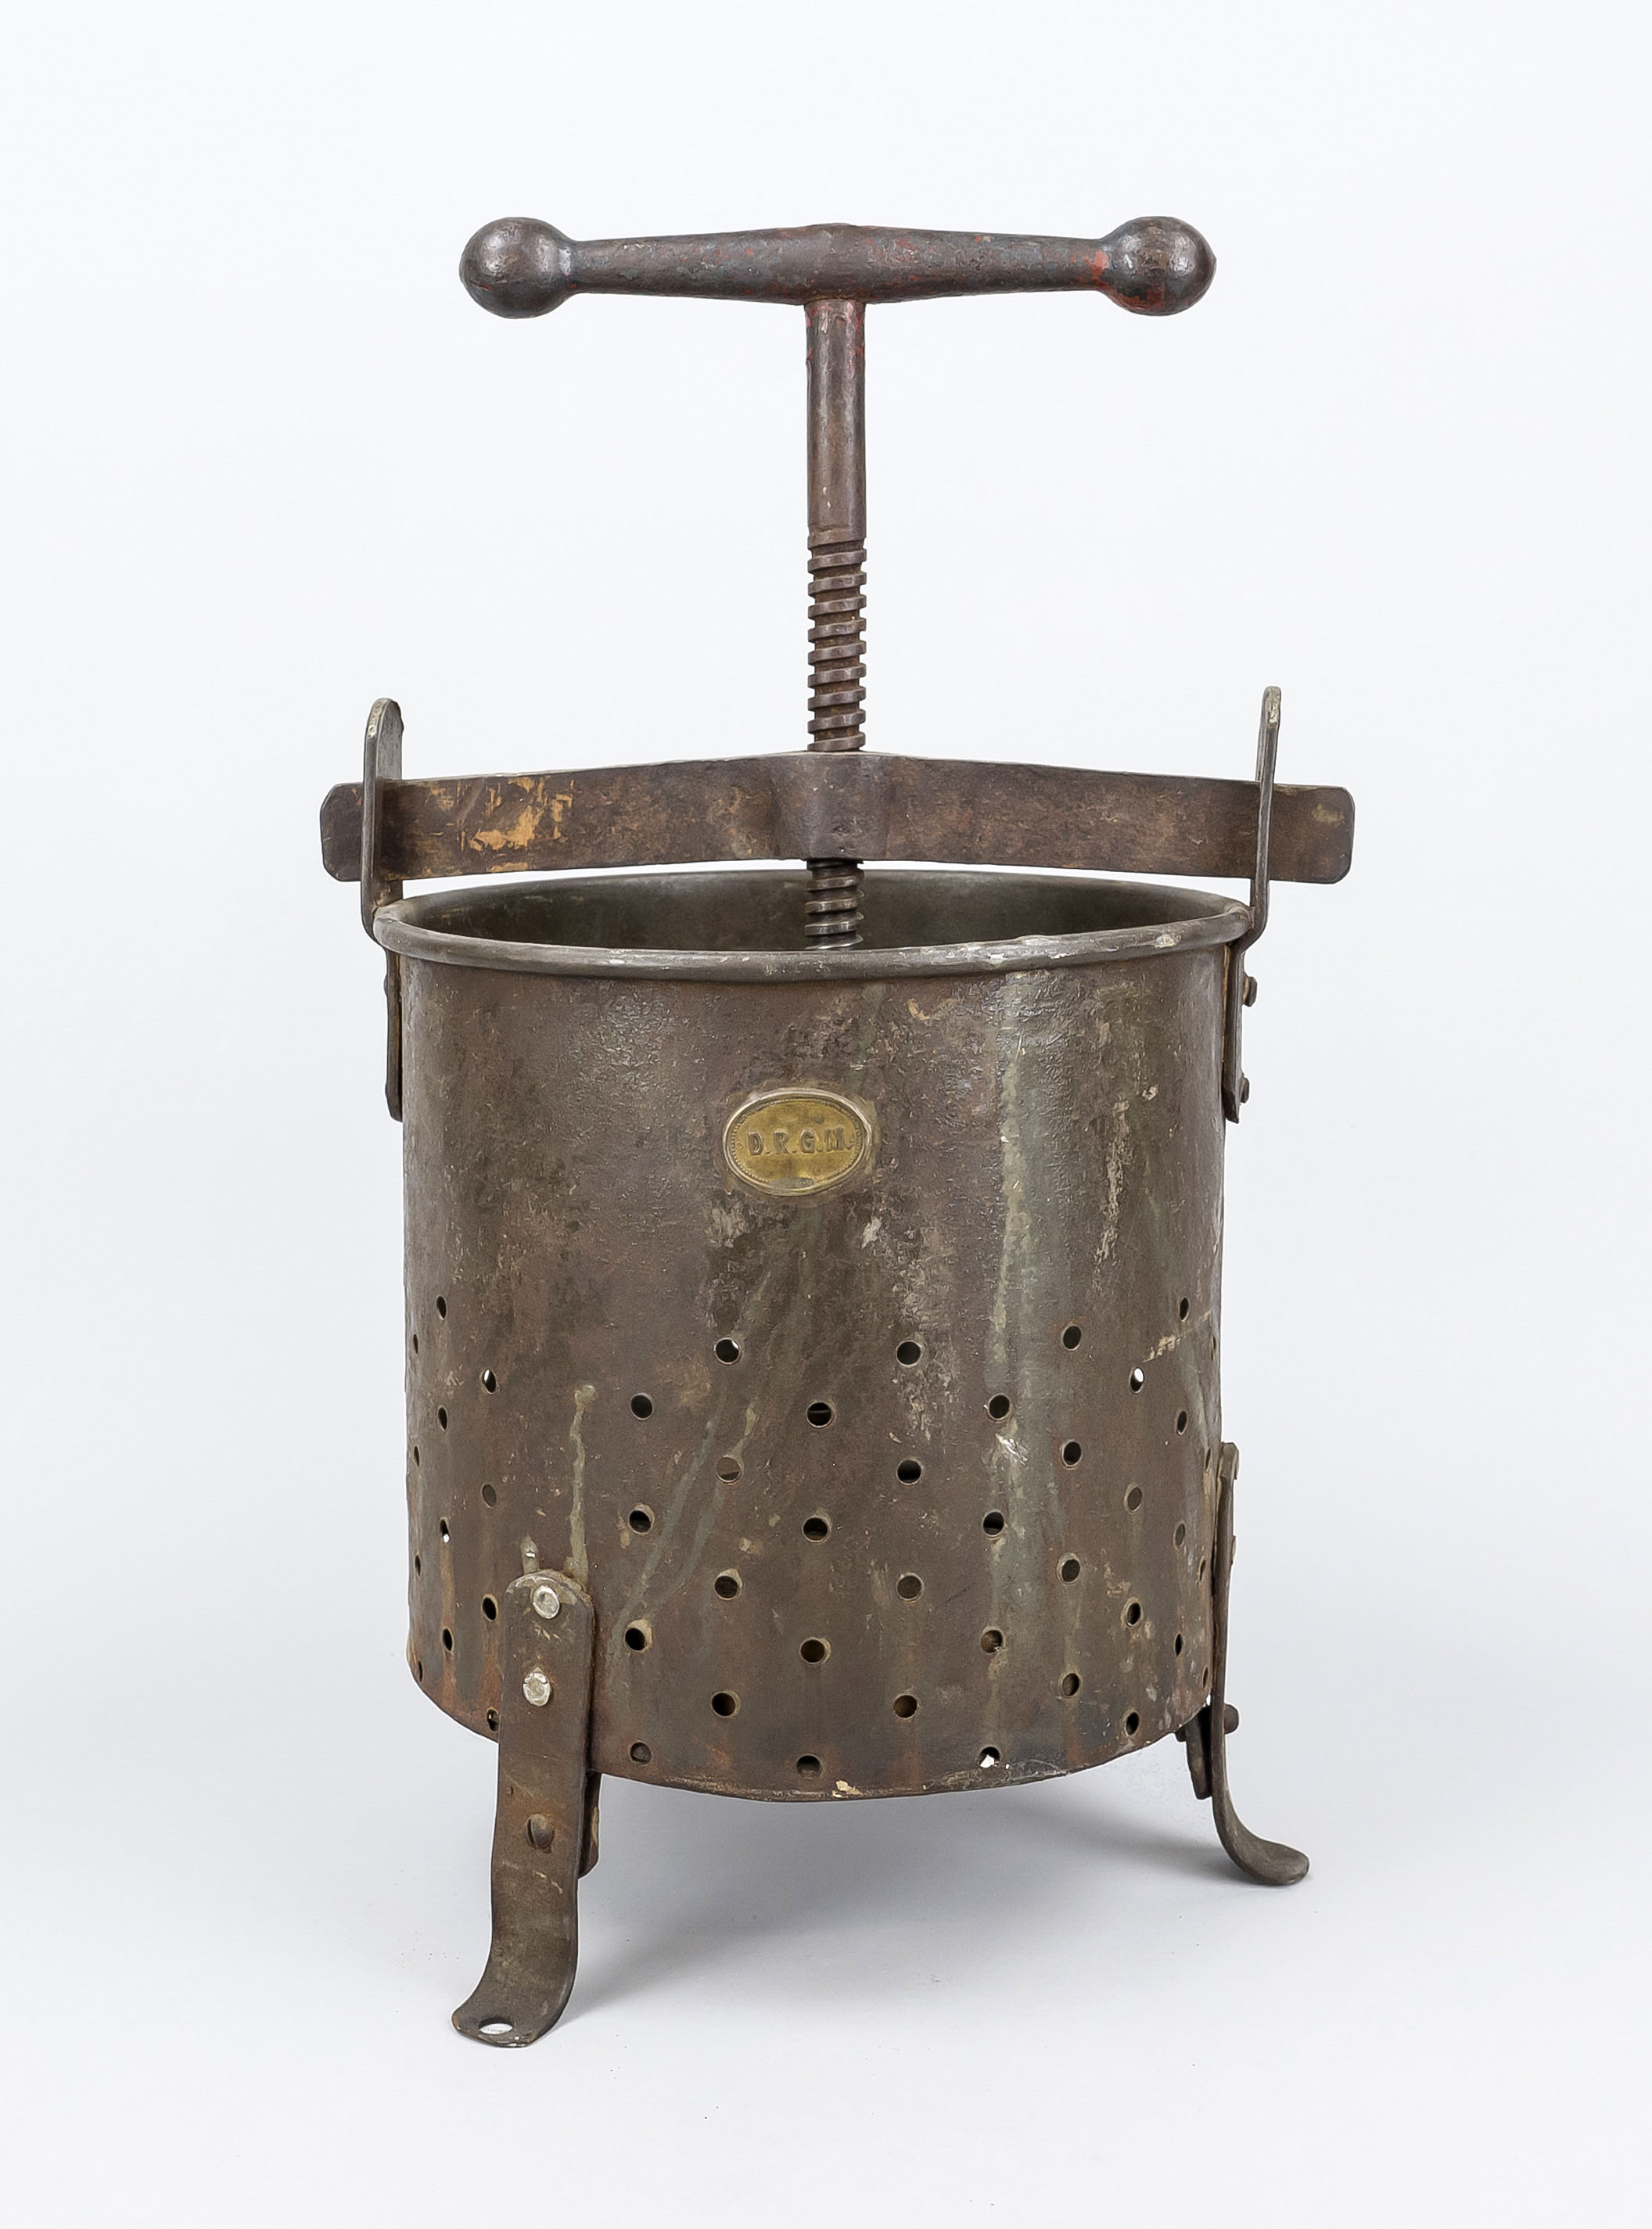 Historic juice press/cider press, 19th century, iron. Perforated cylinder on 3 feet with large